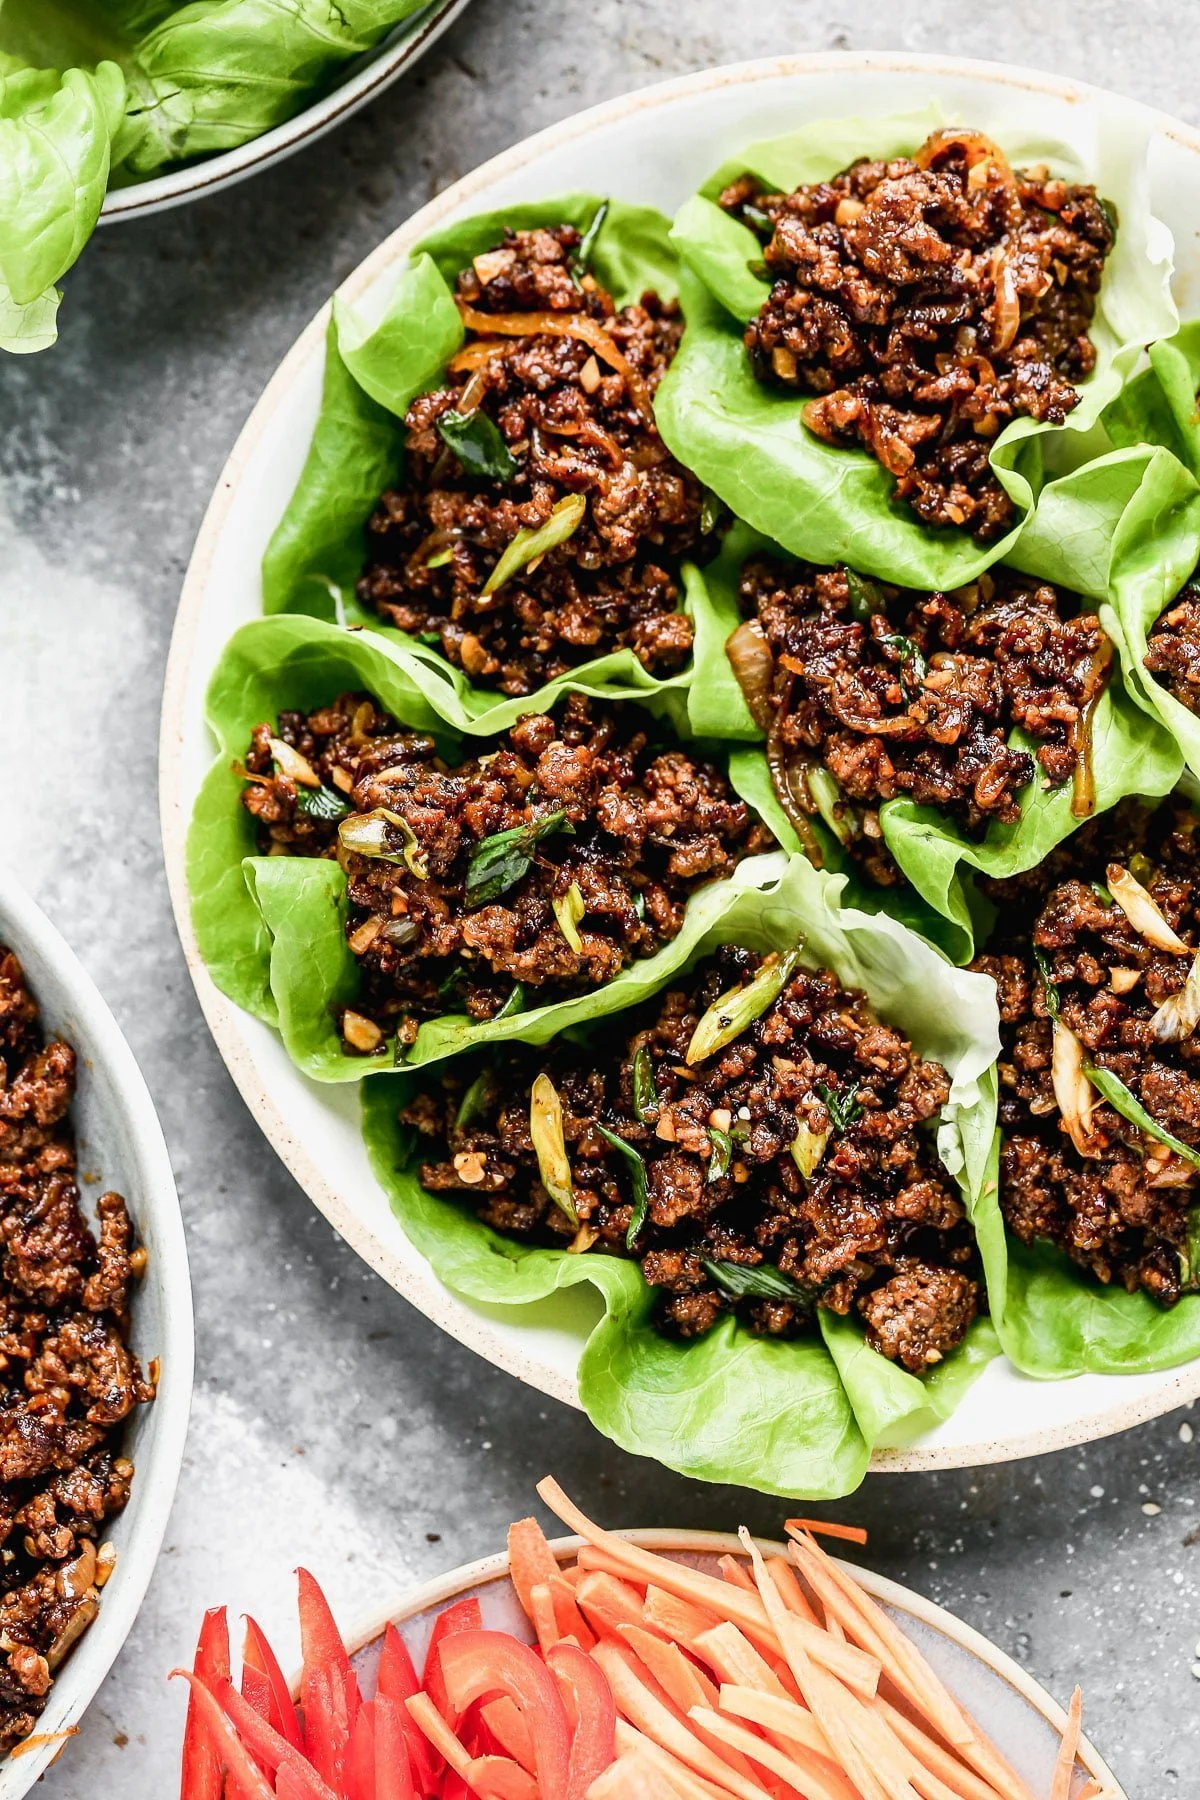 Ultra crispy and smothered in a soy-based sauce studded with rich brown sugar, sweet mirin wine, and brimming with heat from Sambal Oelek, these Beef Lettuce Wraps are my new favorite way to do lettuce. With easy-to-find ingredients, and minimal prep and cook time, they're also the perfect way to get dinner on the table without &nbsp;much effort.&nbsp;